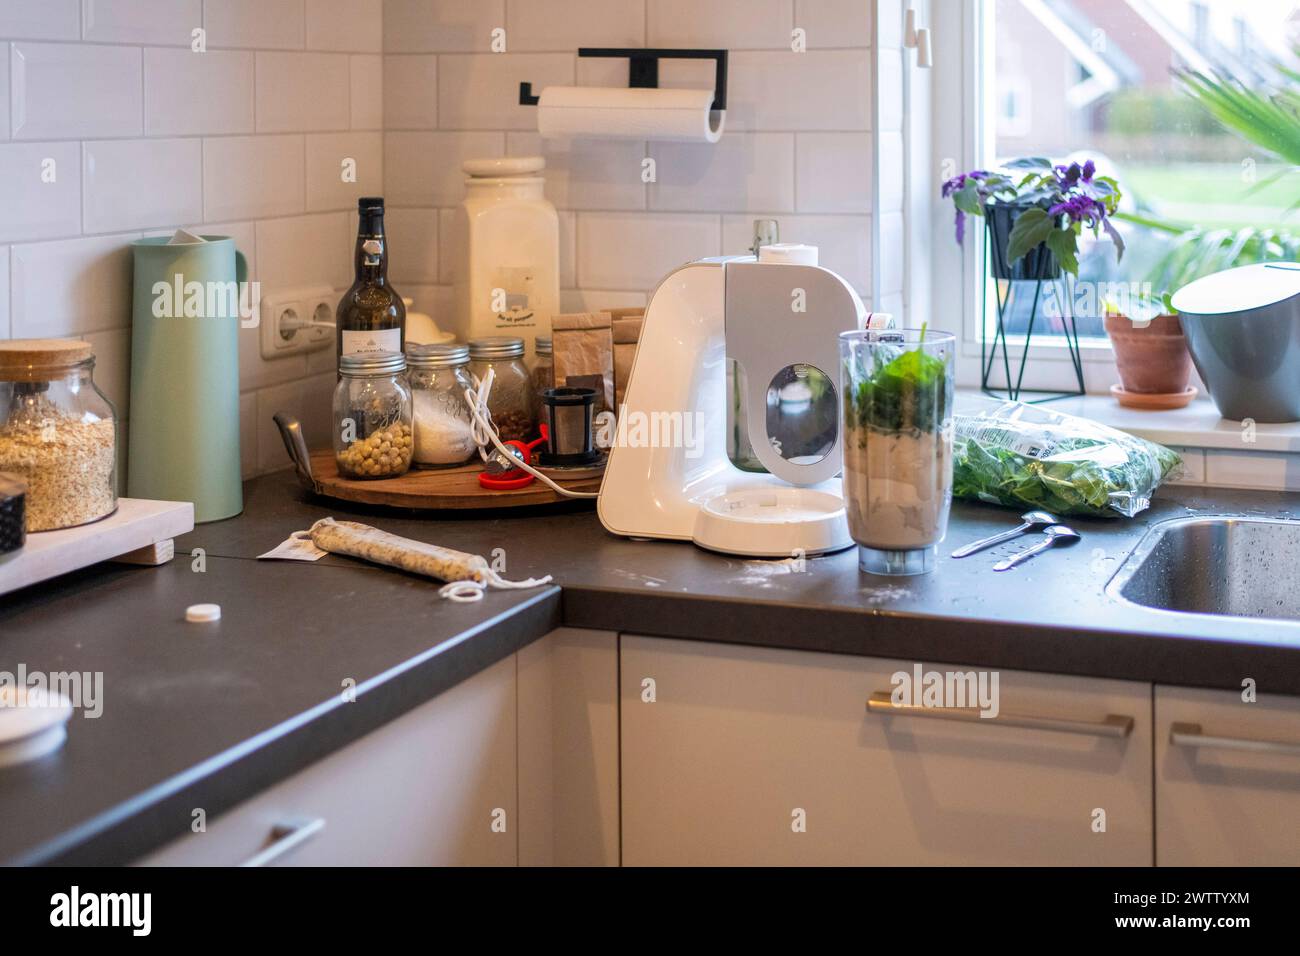 A countertop kitchen scene with a blender and ingredients ready for meal prep. Stock Photo